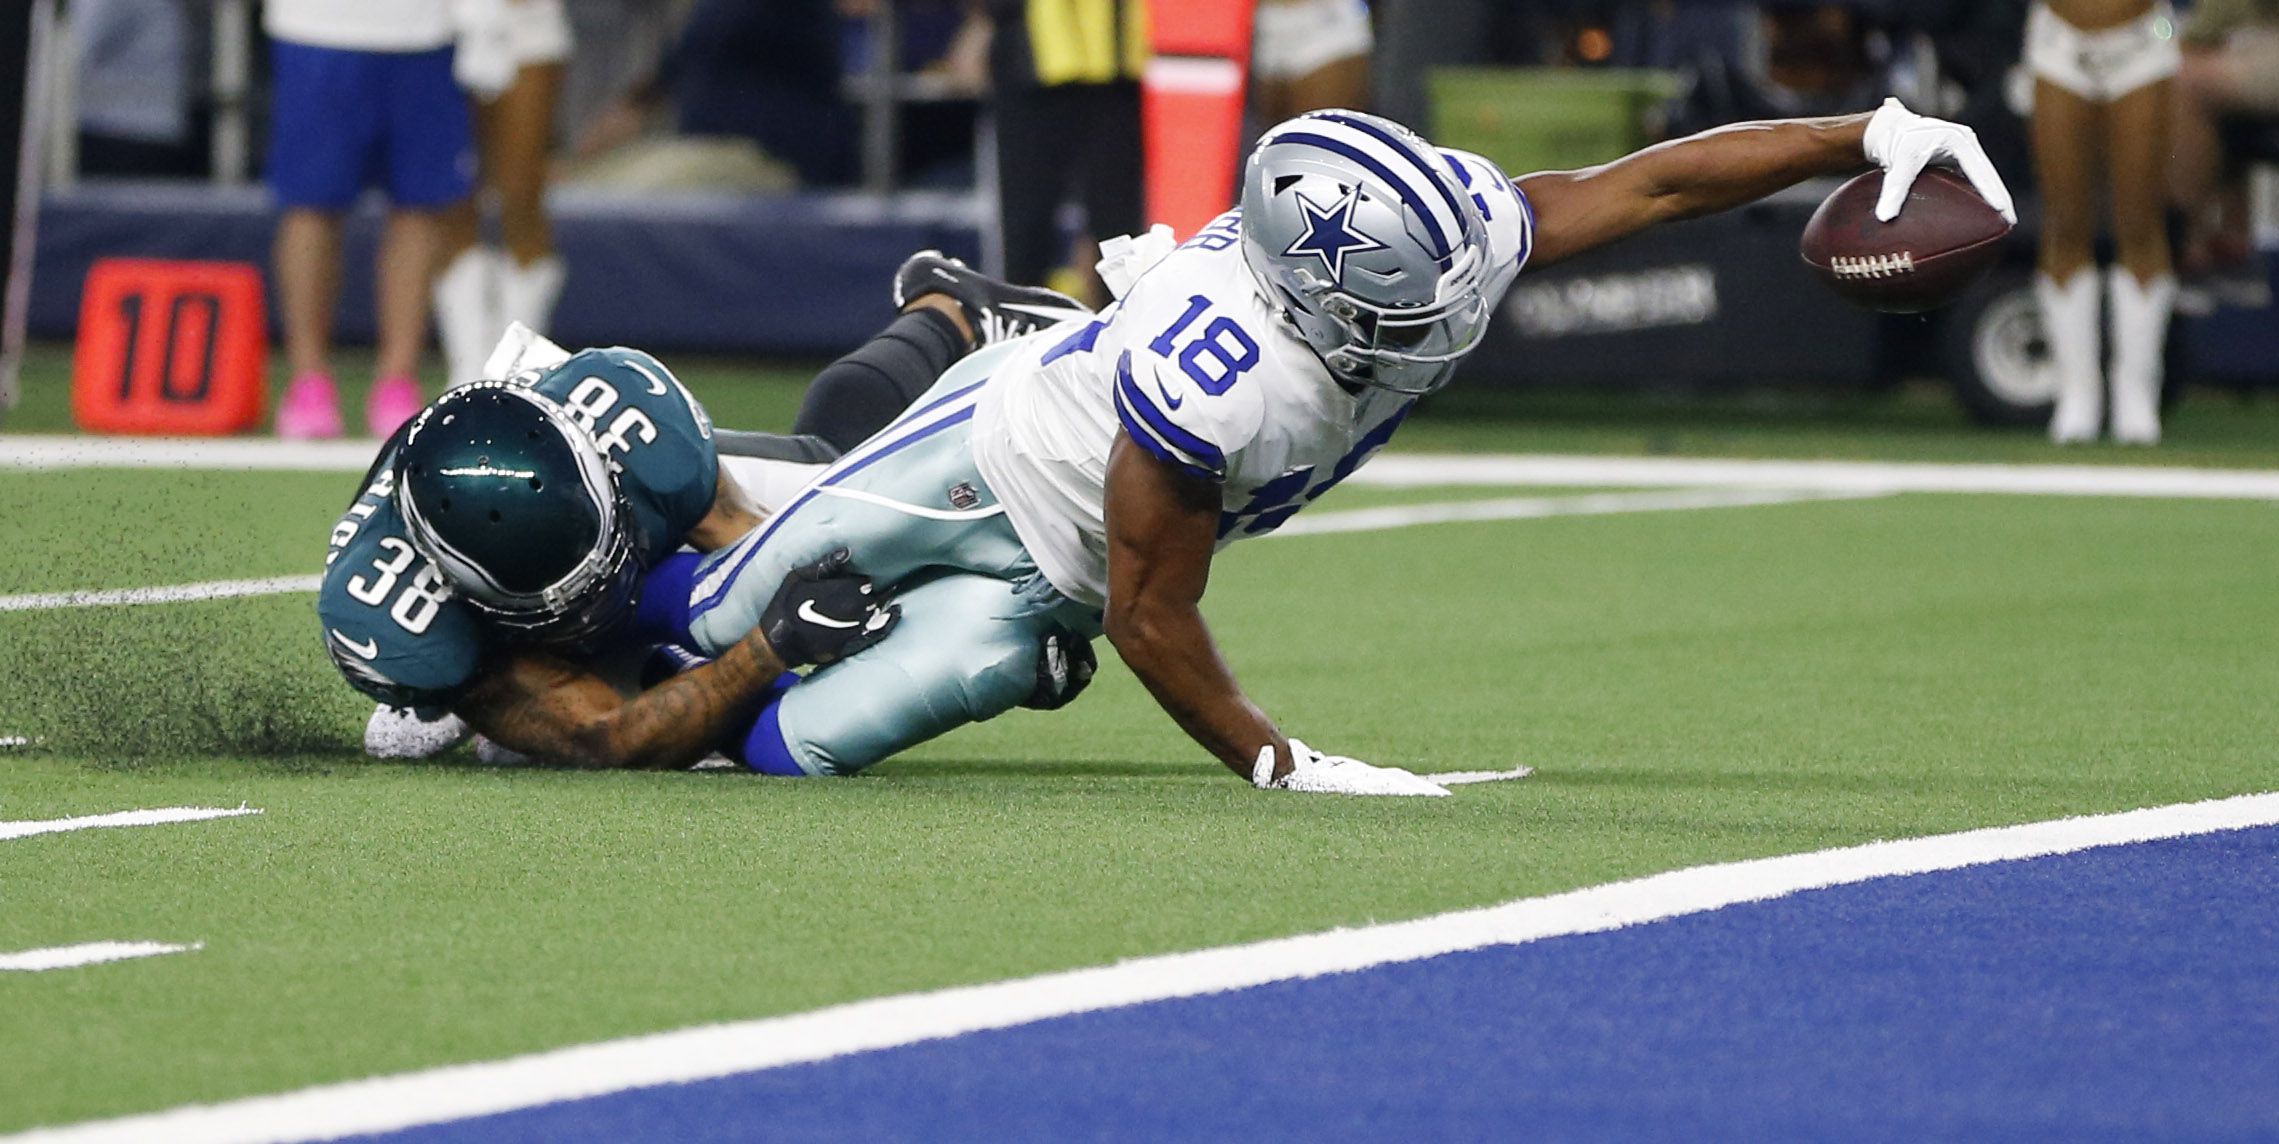 NFL Week 16 Saturday Schedule: Eagles and Cowboys battle with NFC